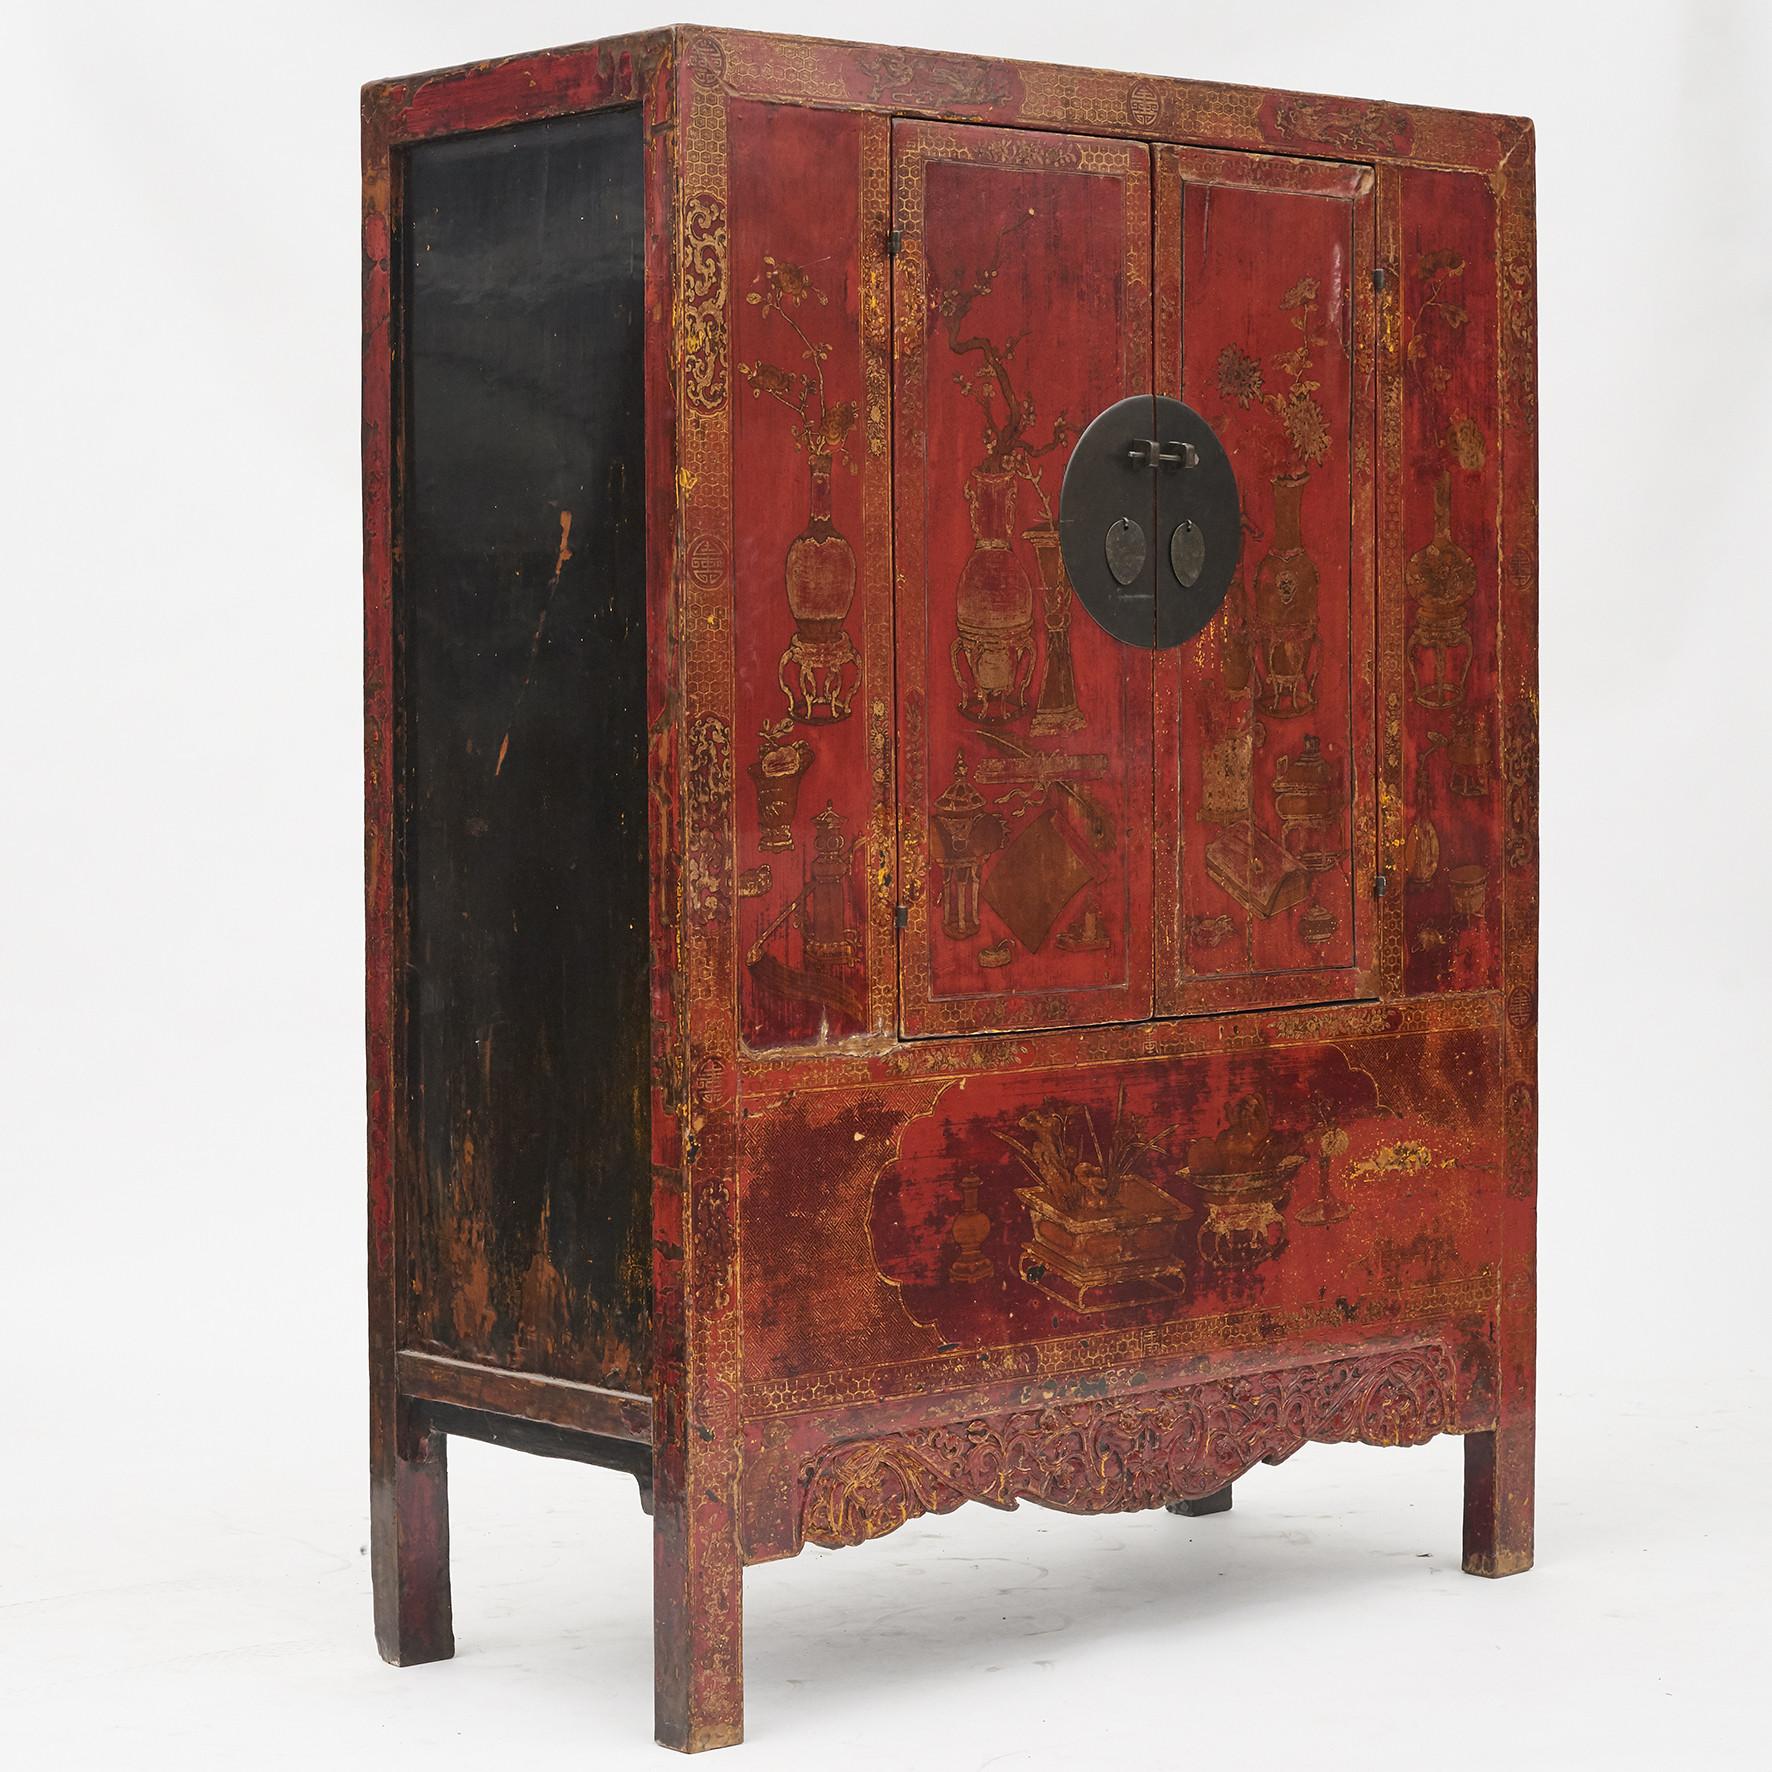 A rare set of cabinets. Red lacquer with original carvings and well-preserved leaf gold decorations.
Black lacquer on the sides of the cabinet.
A decorative and beautiful pair of cabinets from Shanxi Province, late 18th century.

Features two doors,